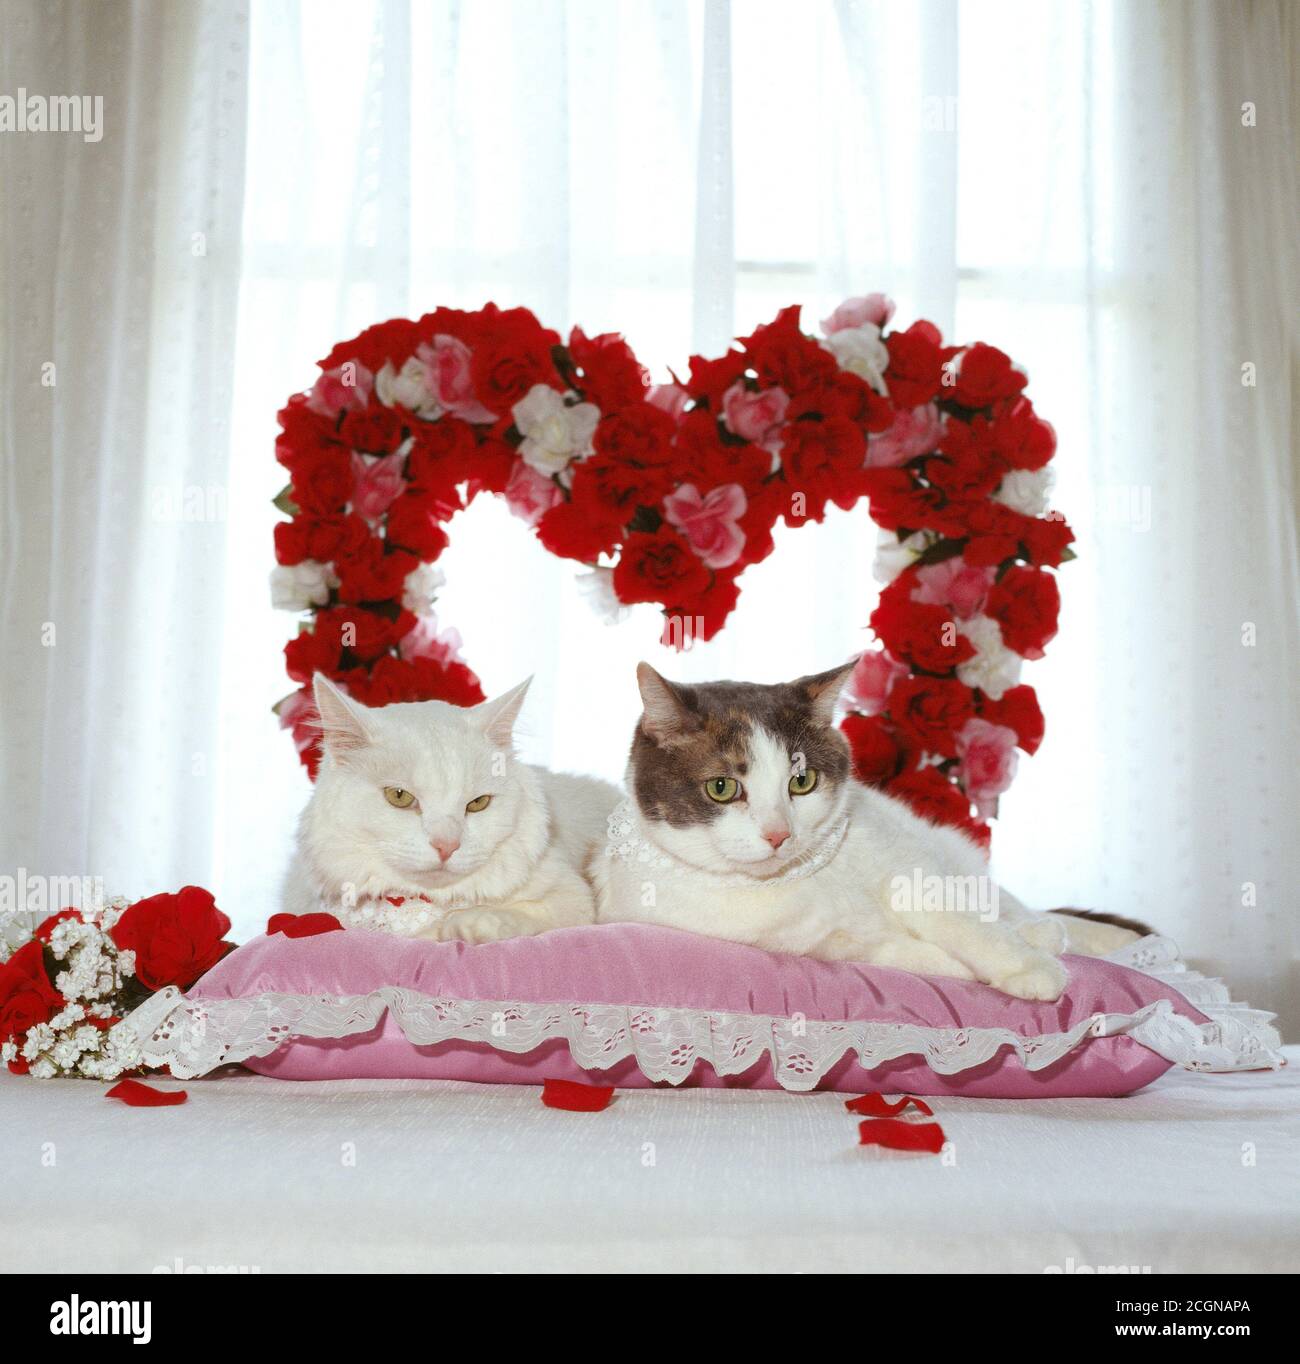 Two loving white cats lay on a pink pillow in front of a big red heart made  of flowers for valentines day Stock Photo - Alamy